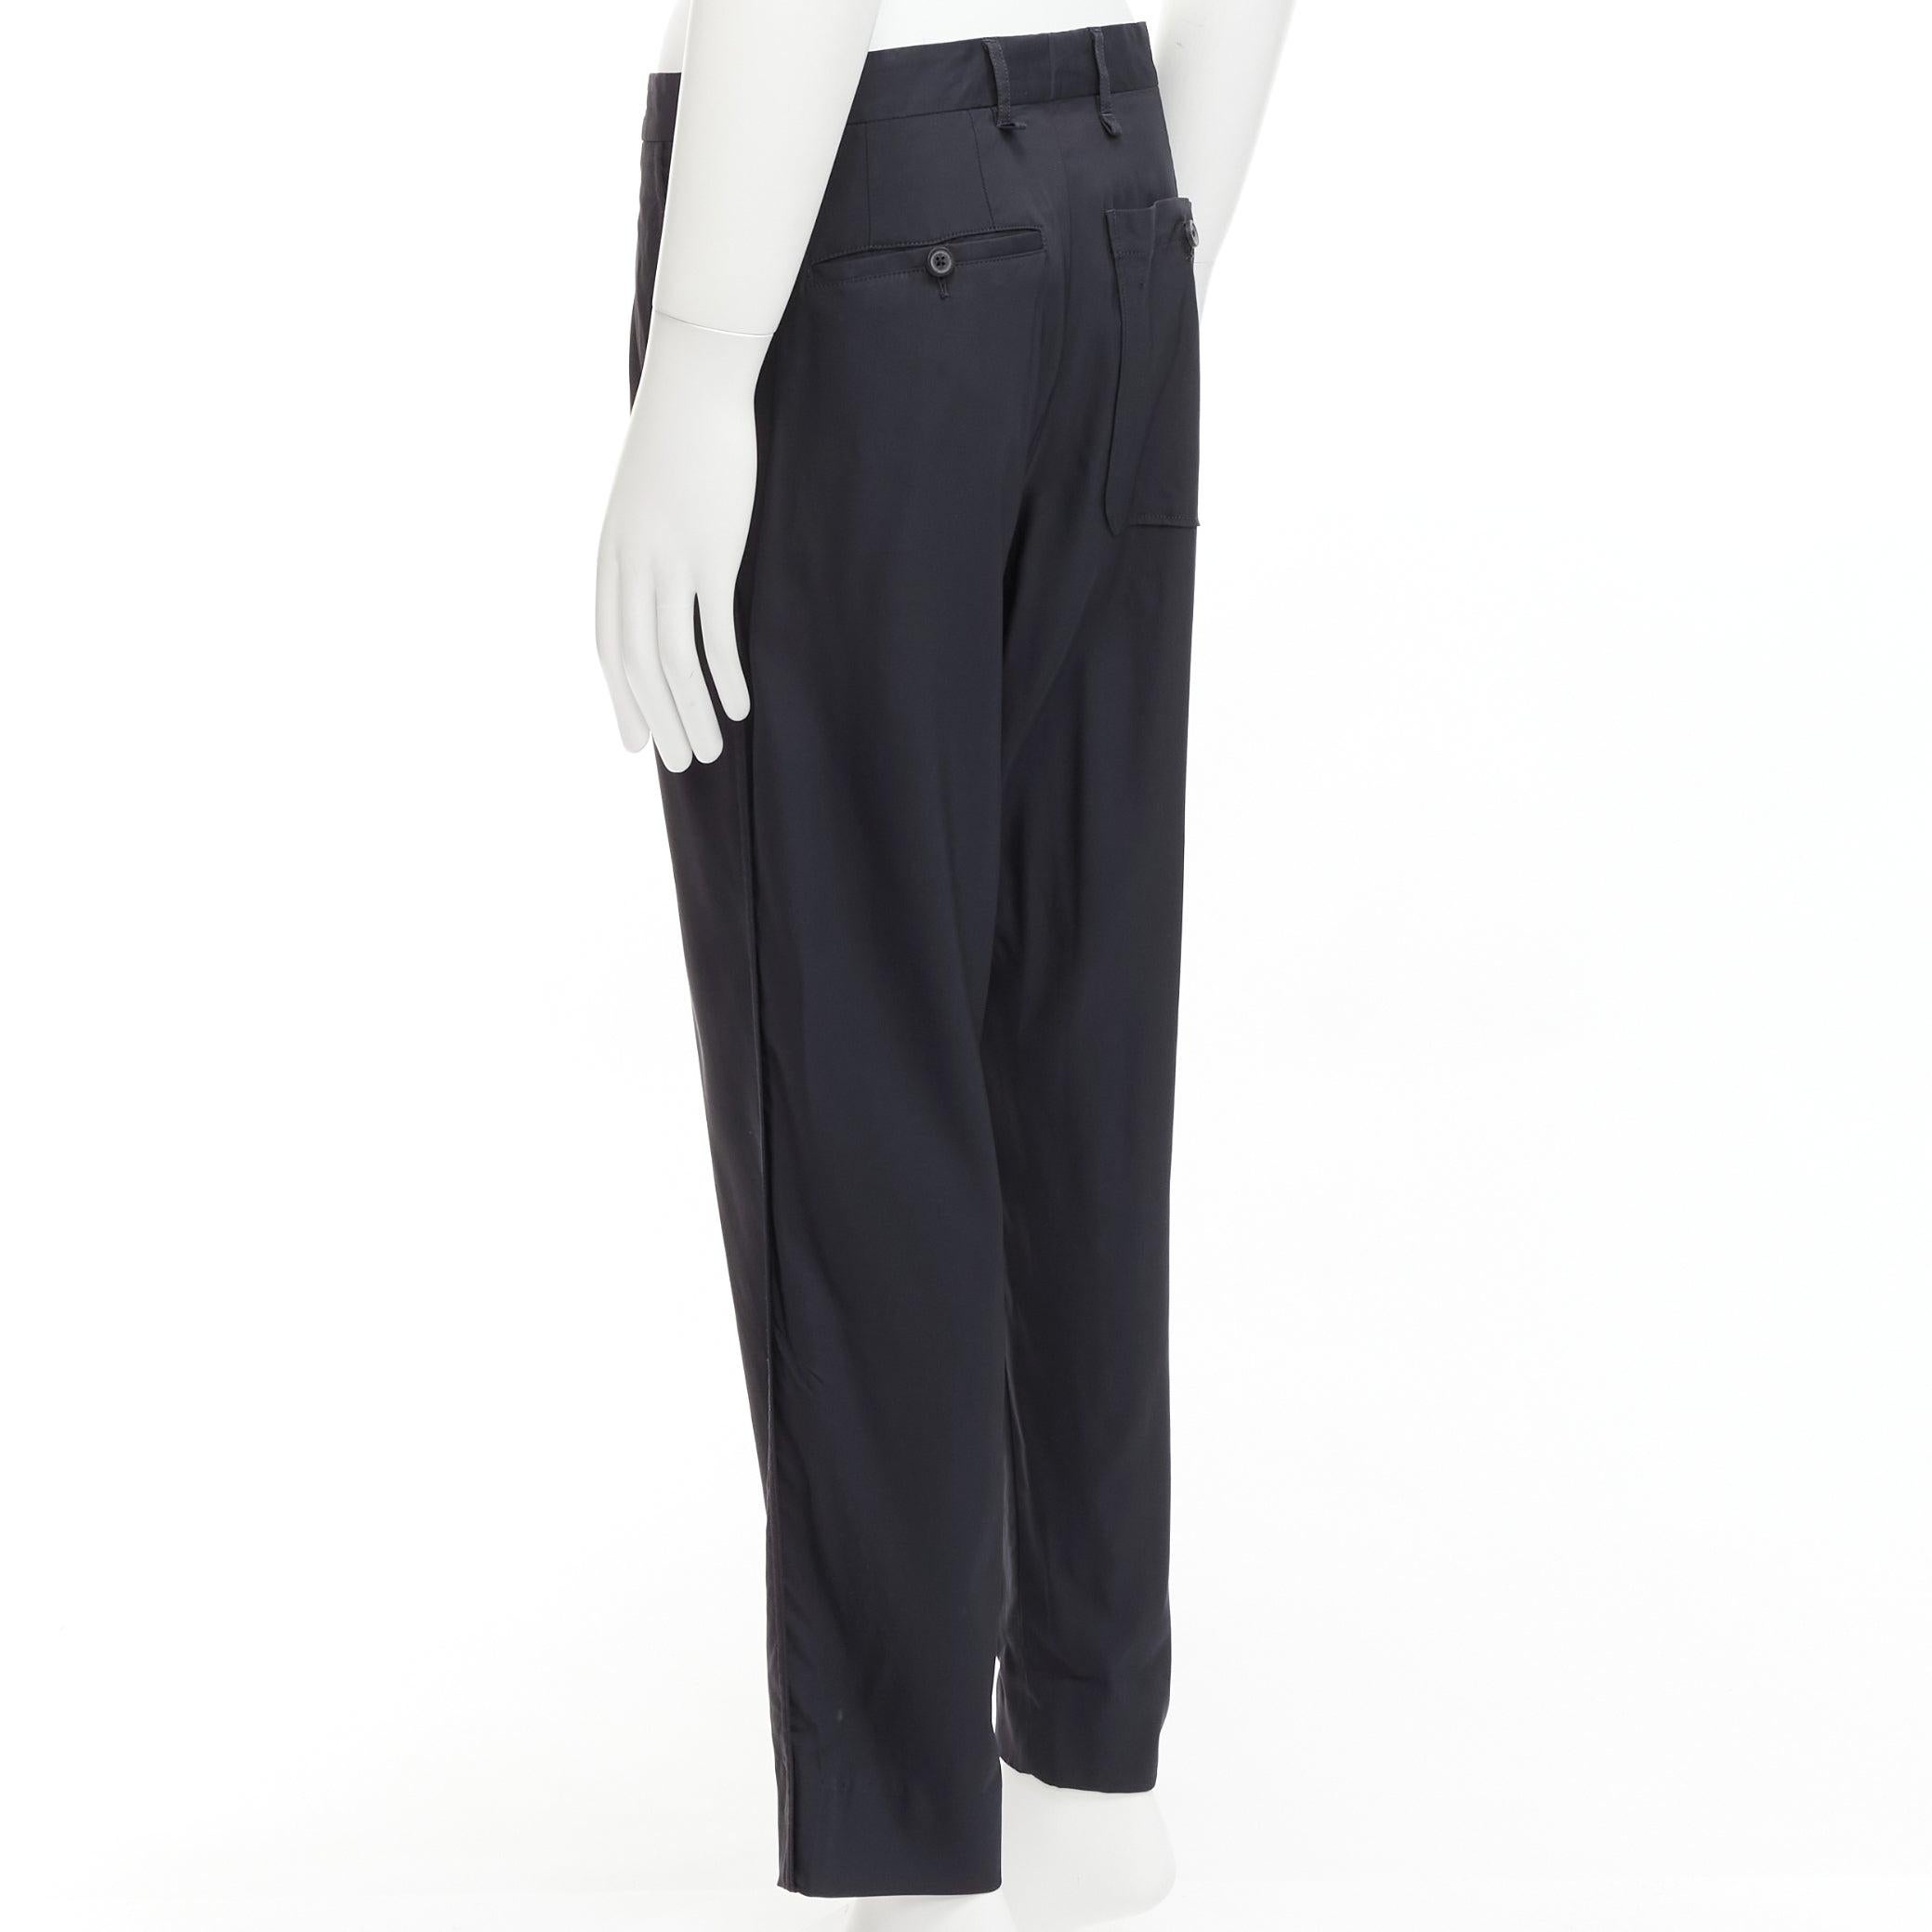 LANVIN navy viscose blend front pleats classy tapered dress pants IT46 S For Sale 2